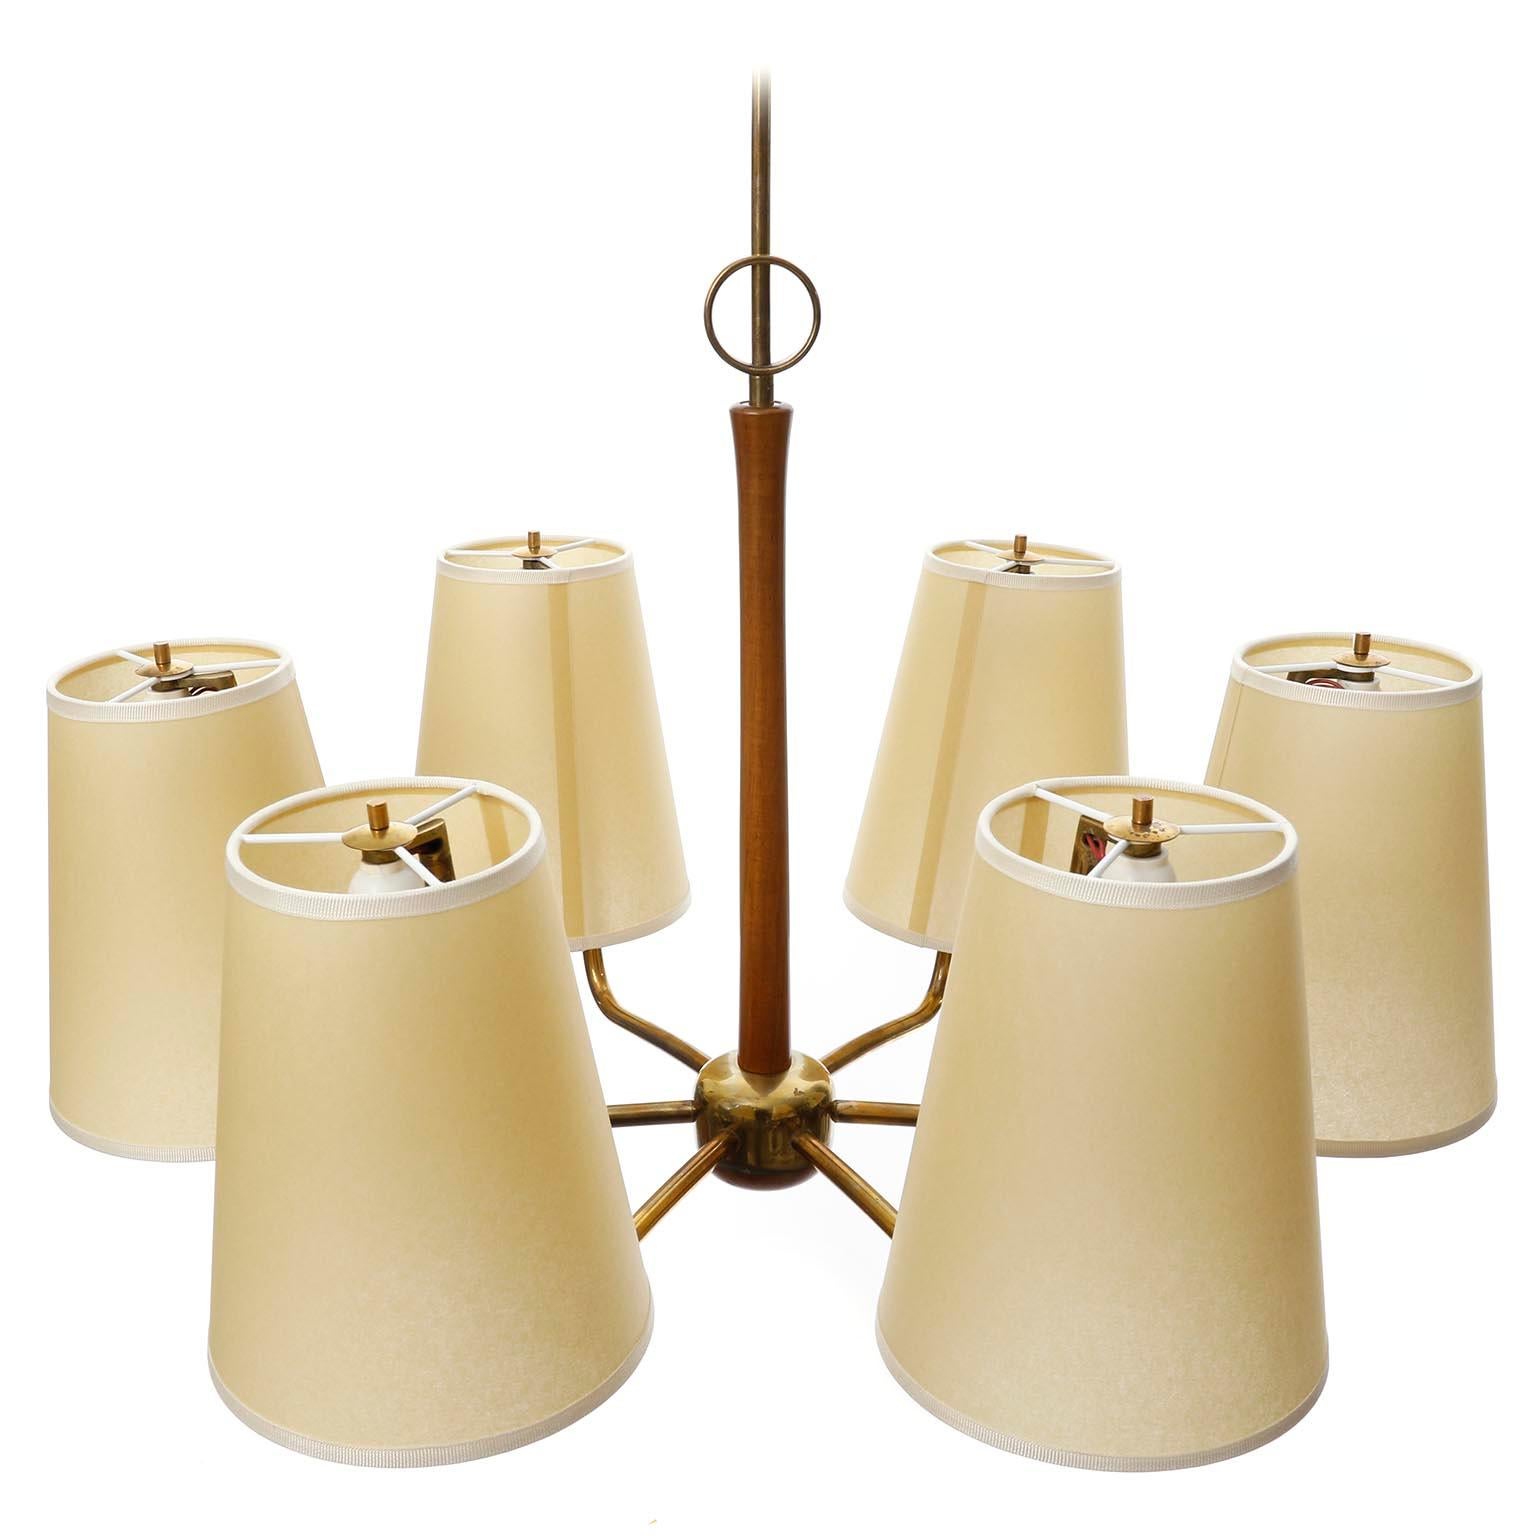 A fantastic chandelier model 'KIRI' no. 3686/6 with six arms made of brass and walnut wood with parchment lamp shades by J.T. Kalmar, Vienna, Austria, manufactured in midcentury, ca. 1960 (late 1950s or early 1960s).
The light is based on a design